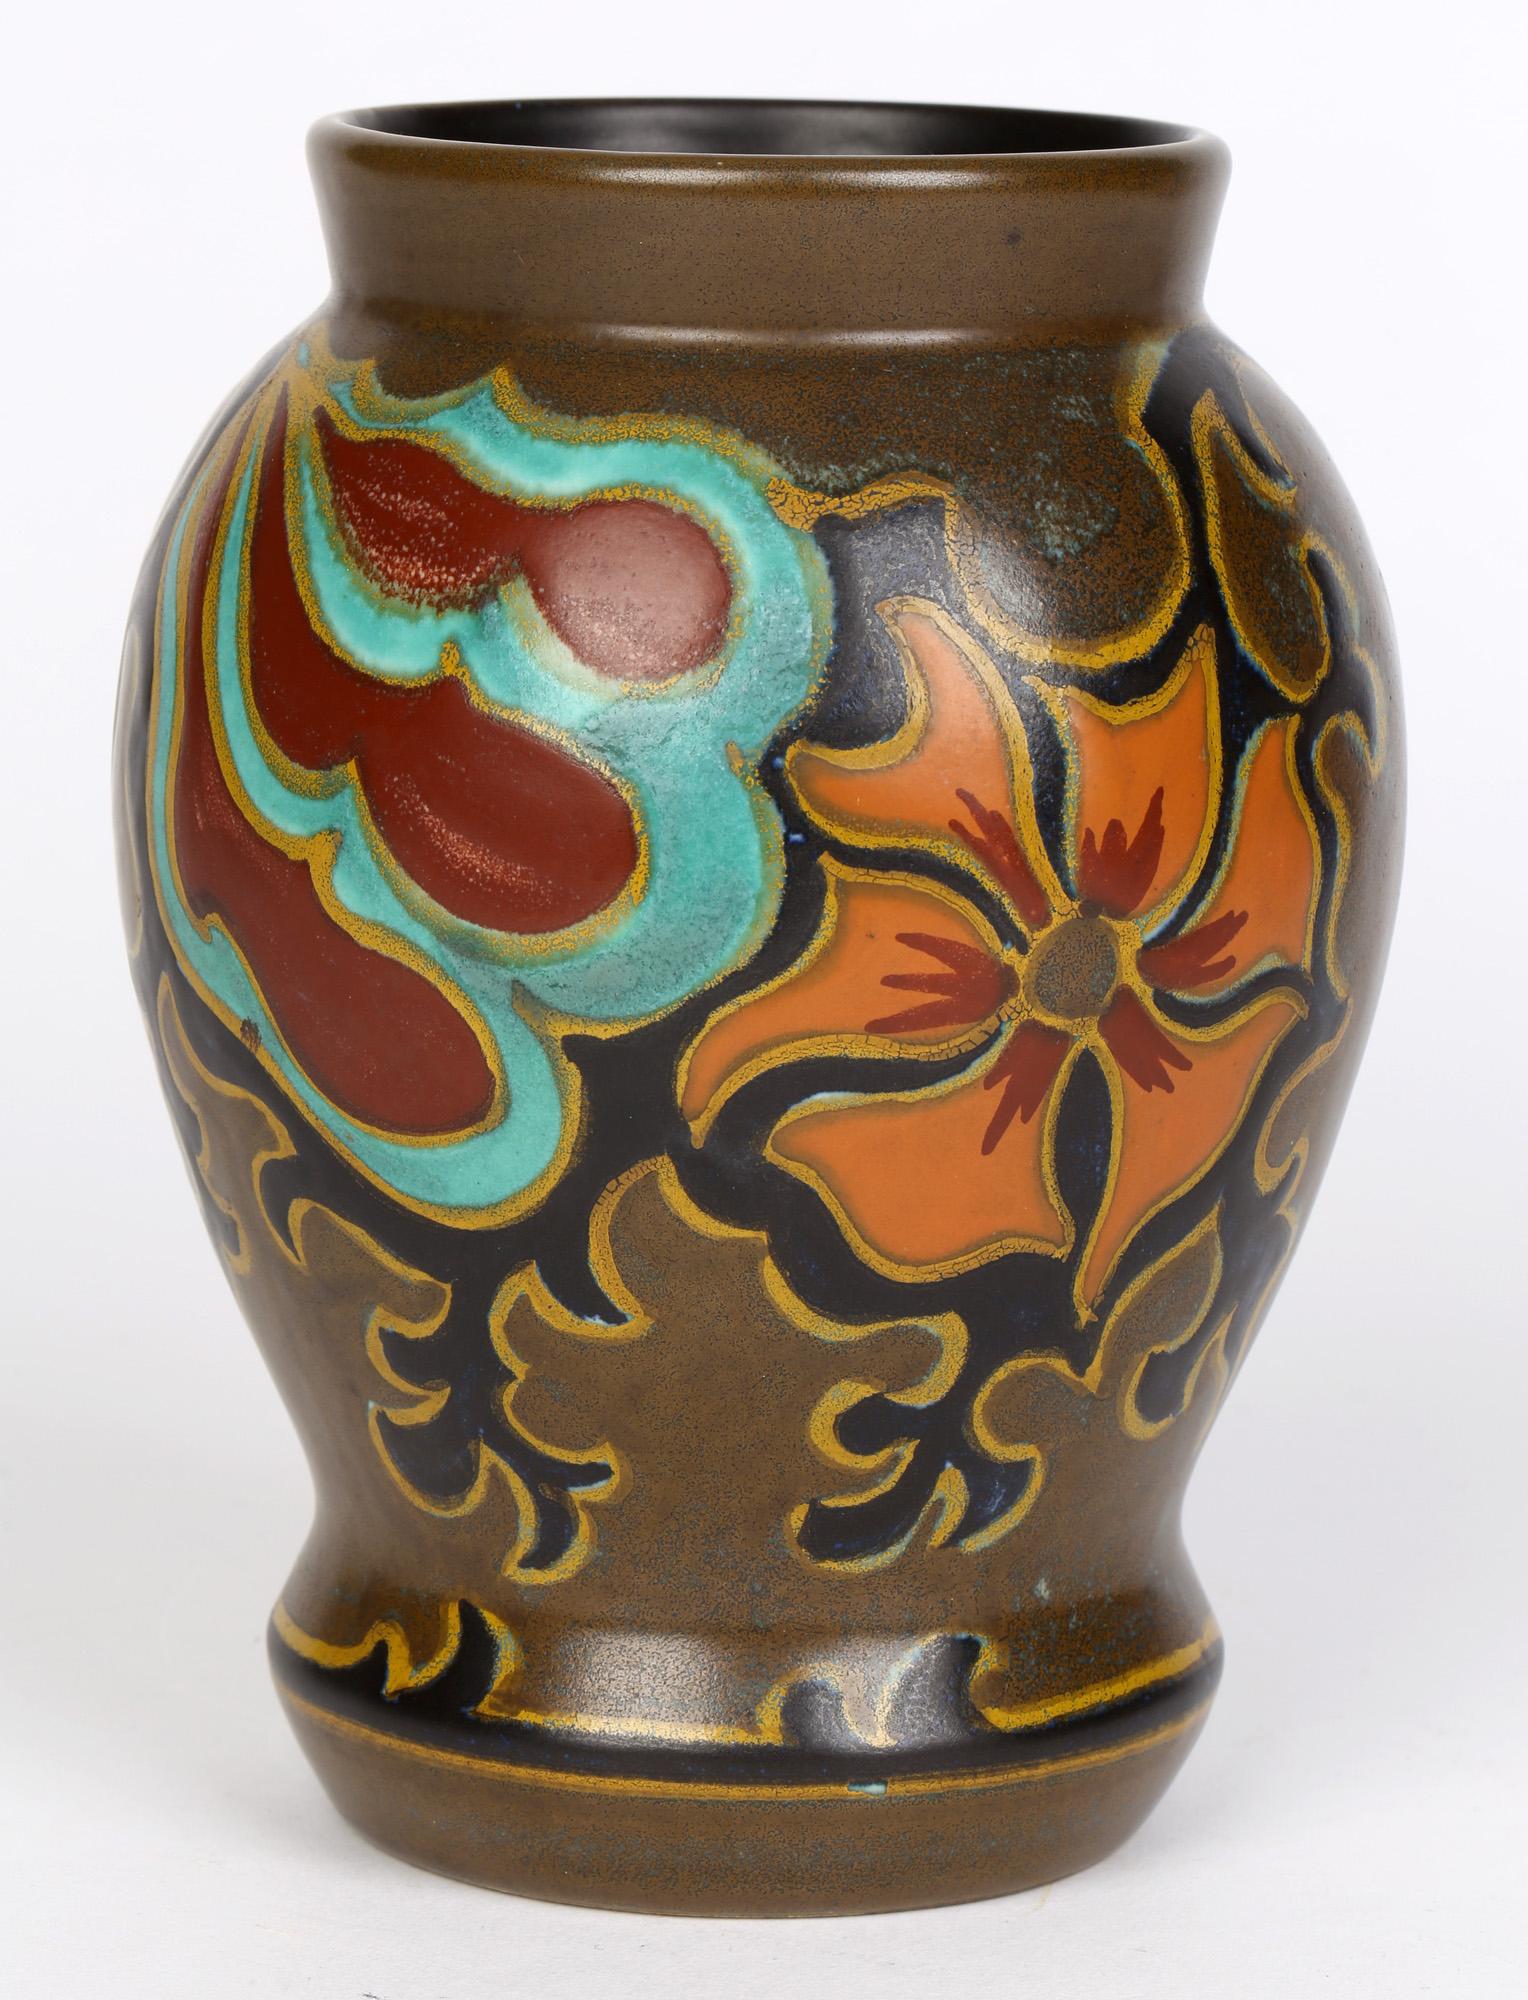 Plateelbakkerij Zuid-Holland (PZH) Dutch Gouda Art Deco hand painted pottery vase in the Silvia design dating from around 1920. The lightly potted earthenware vase is hand painted in coloured enamels with an abstract floral design on a bronze-brown